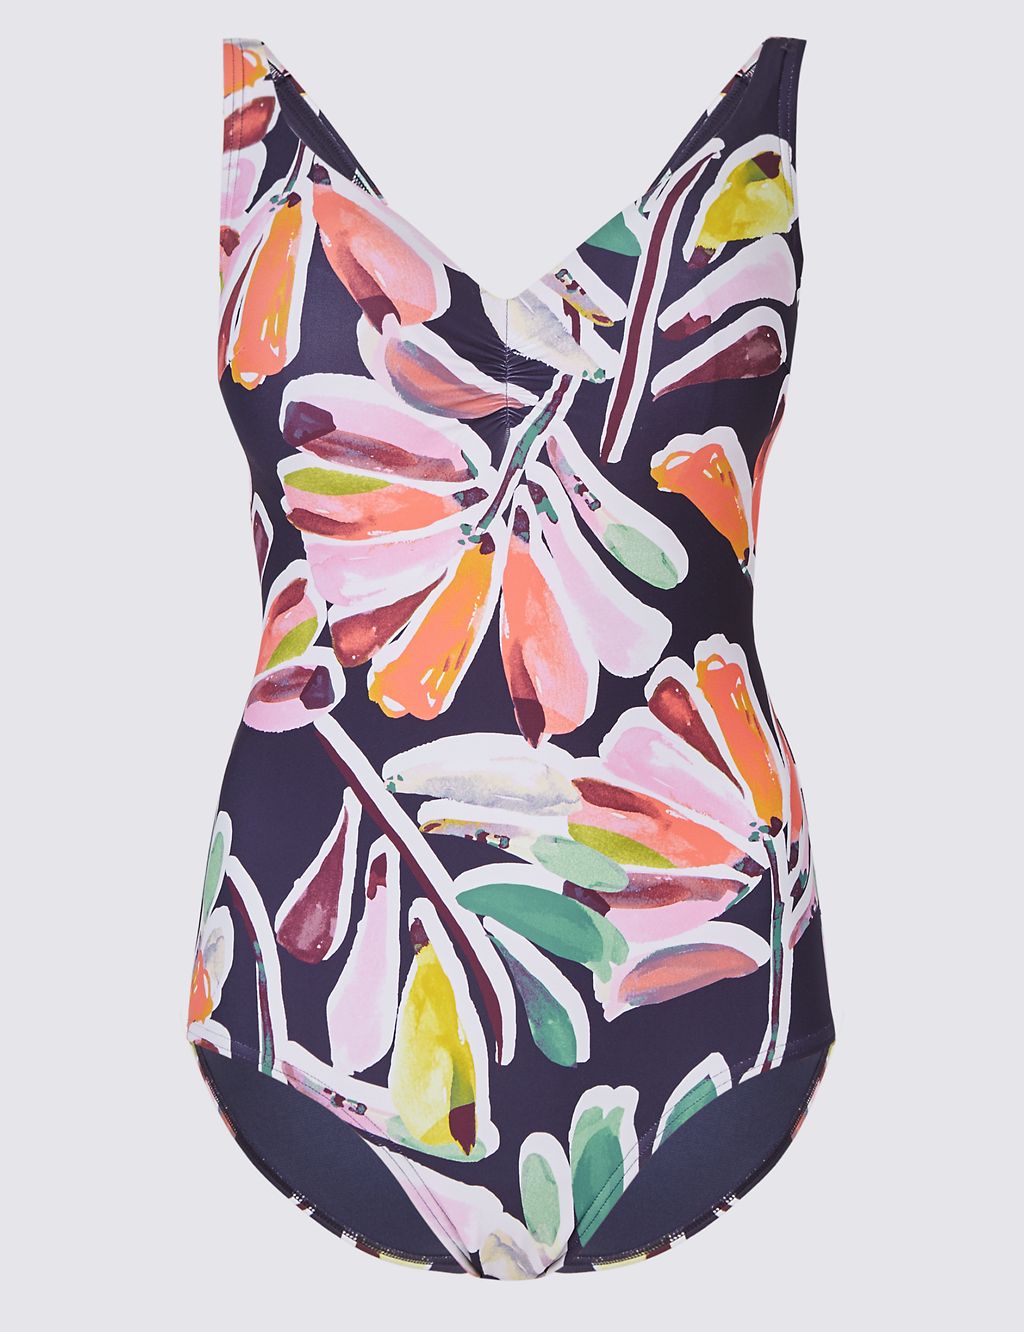 Secret Slimming™ Printed Wired Swimsuit DD-G 1 of 3